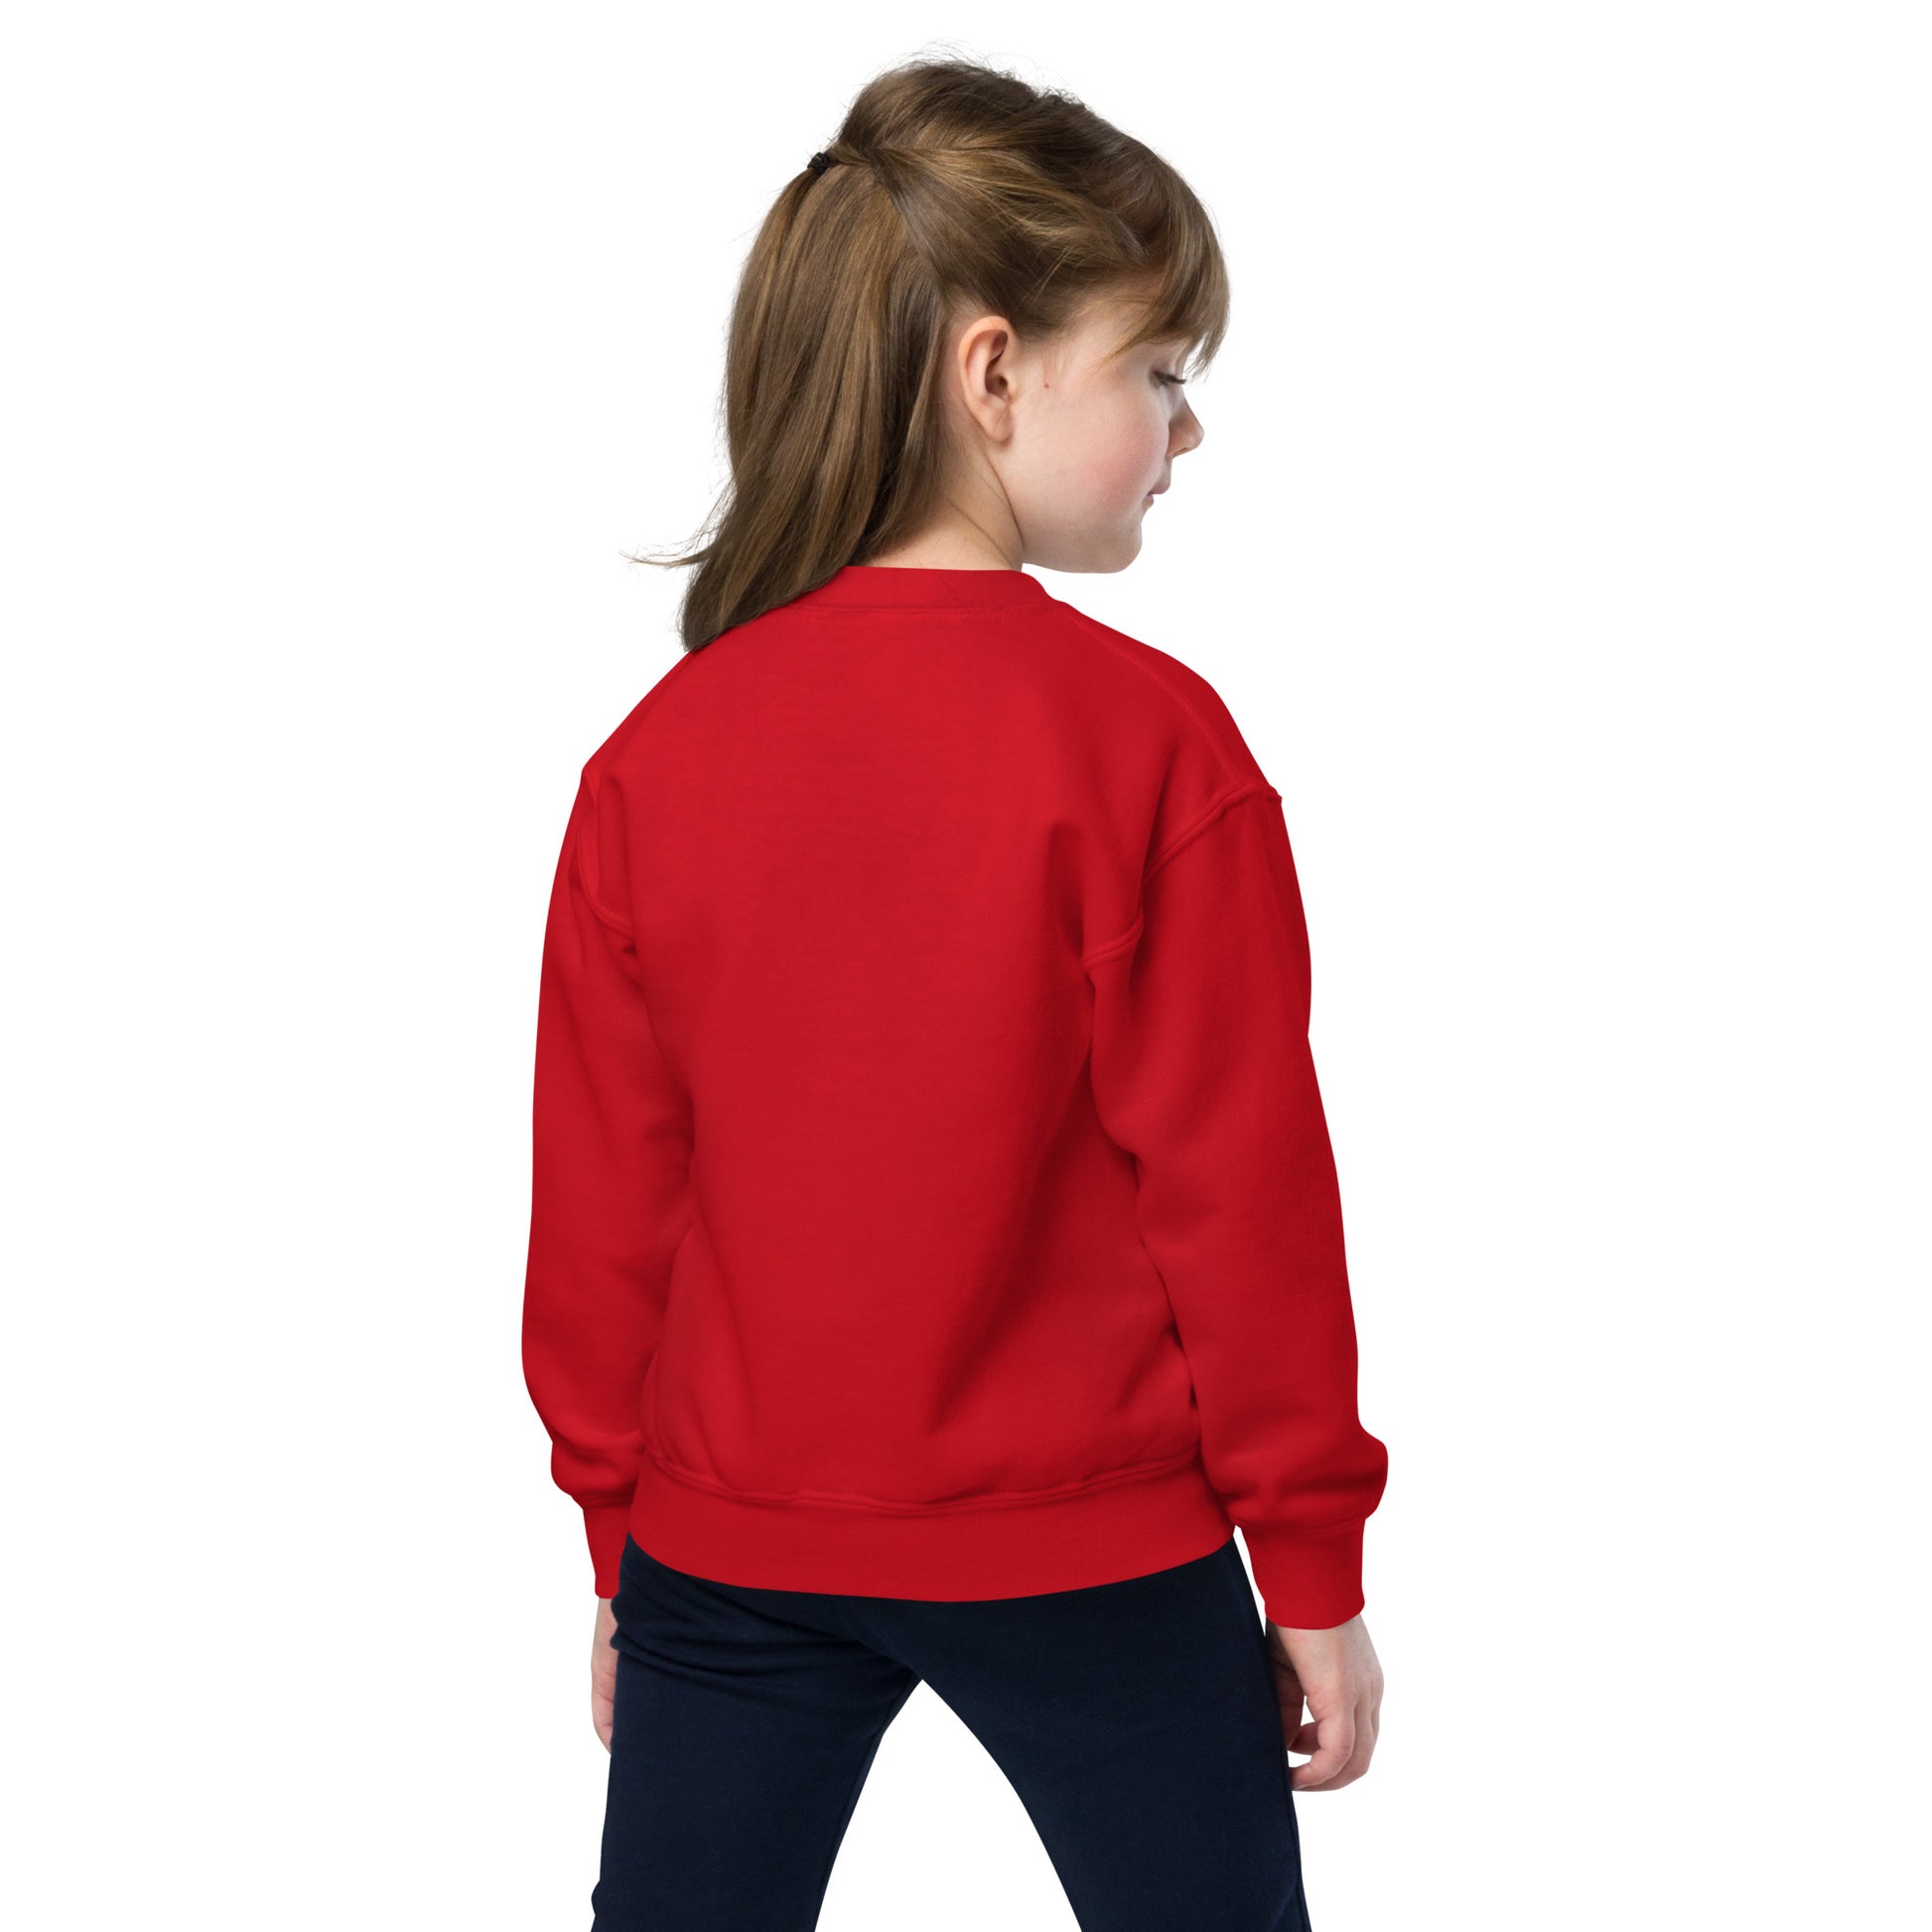 a young girl wearing a red sweatshirt and black pants